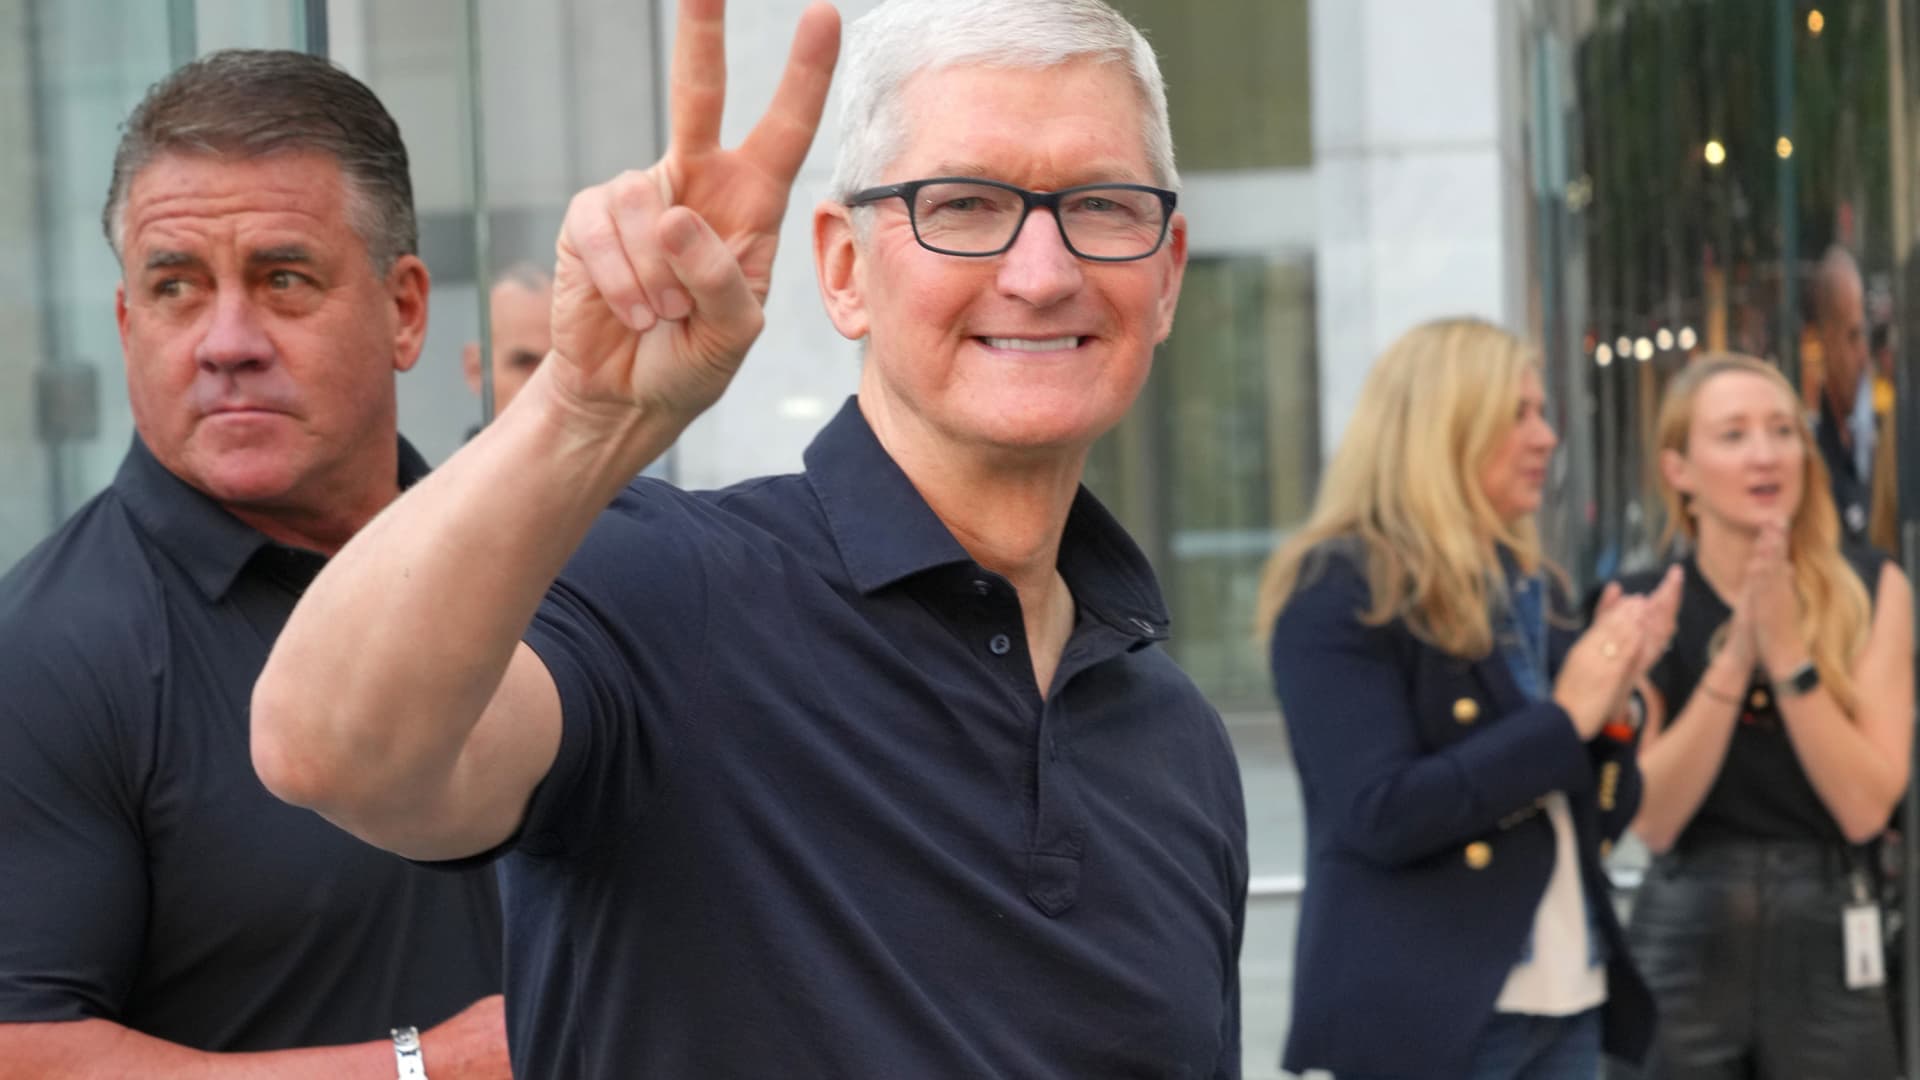 Apple declares victory after decision reached in Epic Games appeal